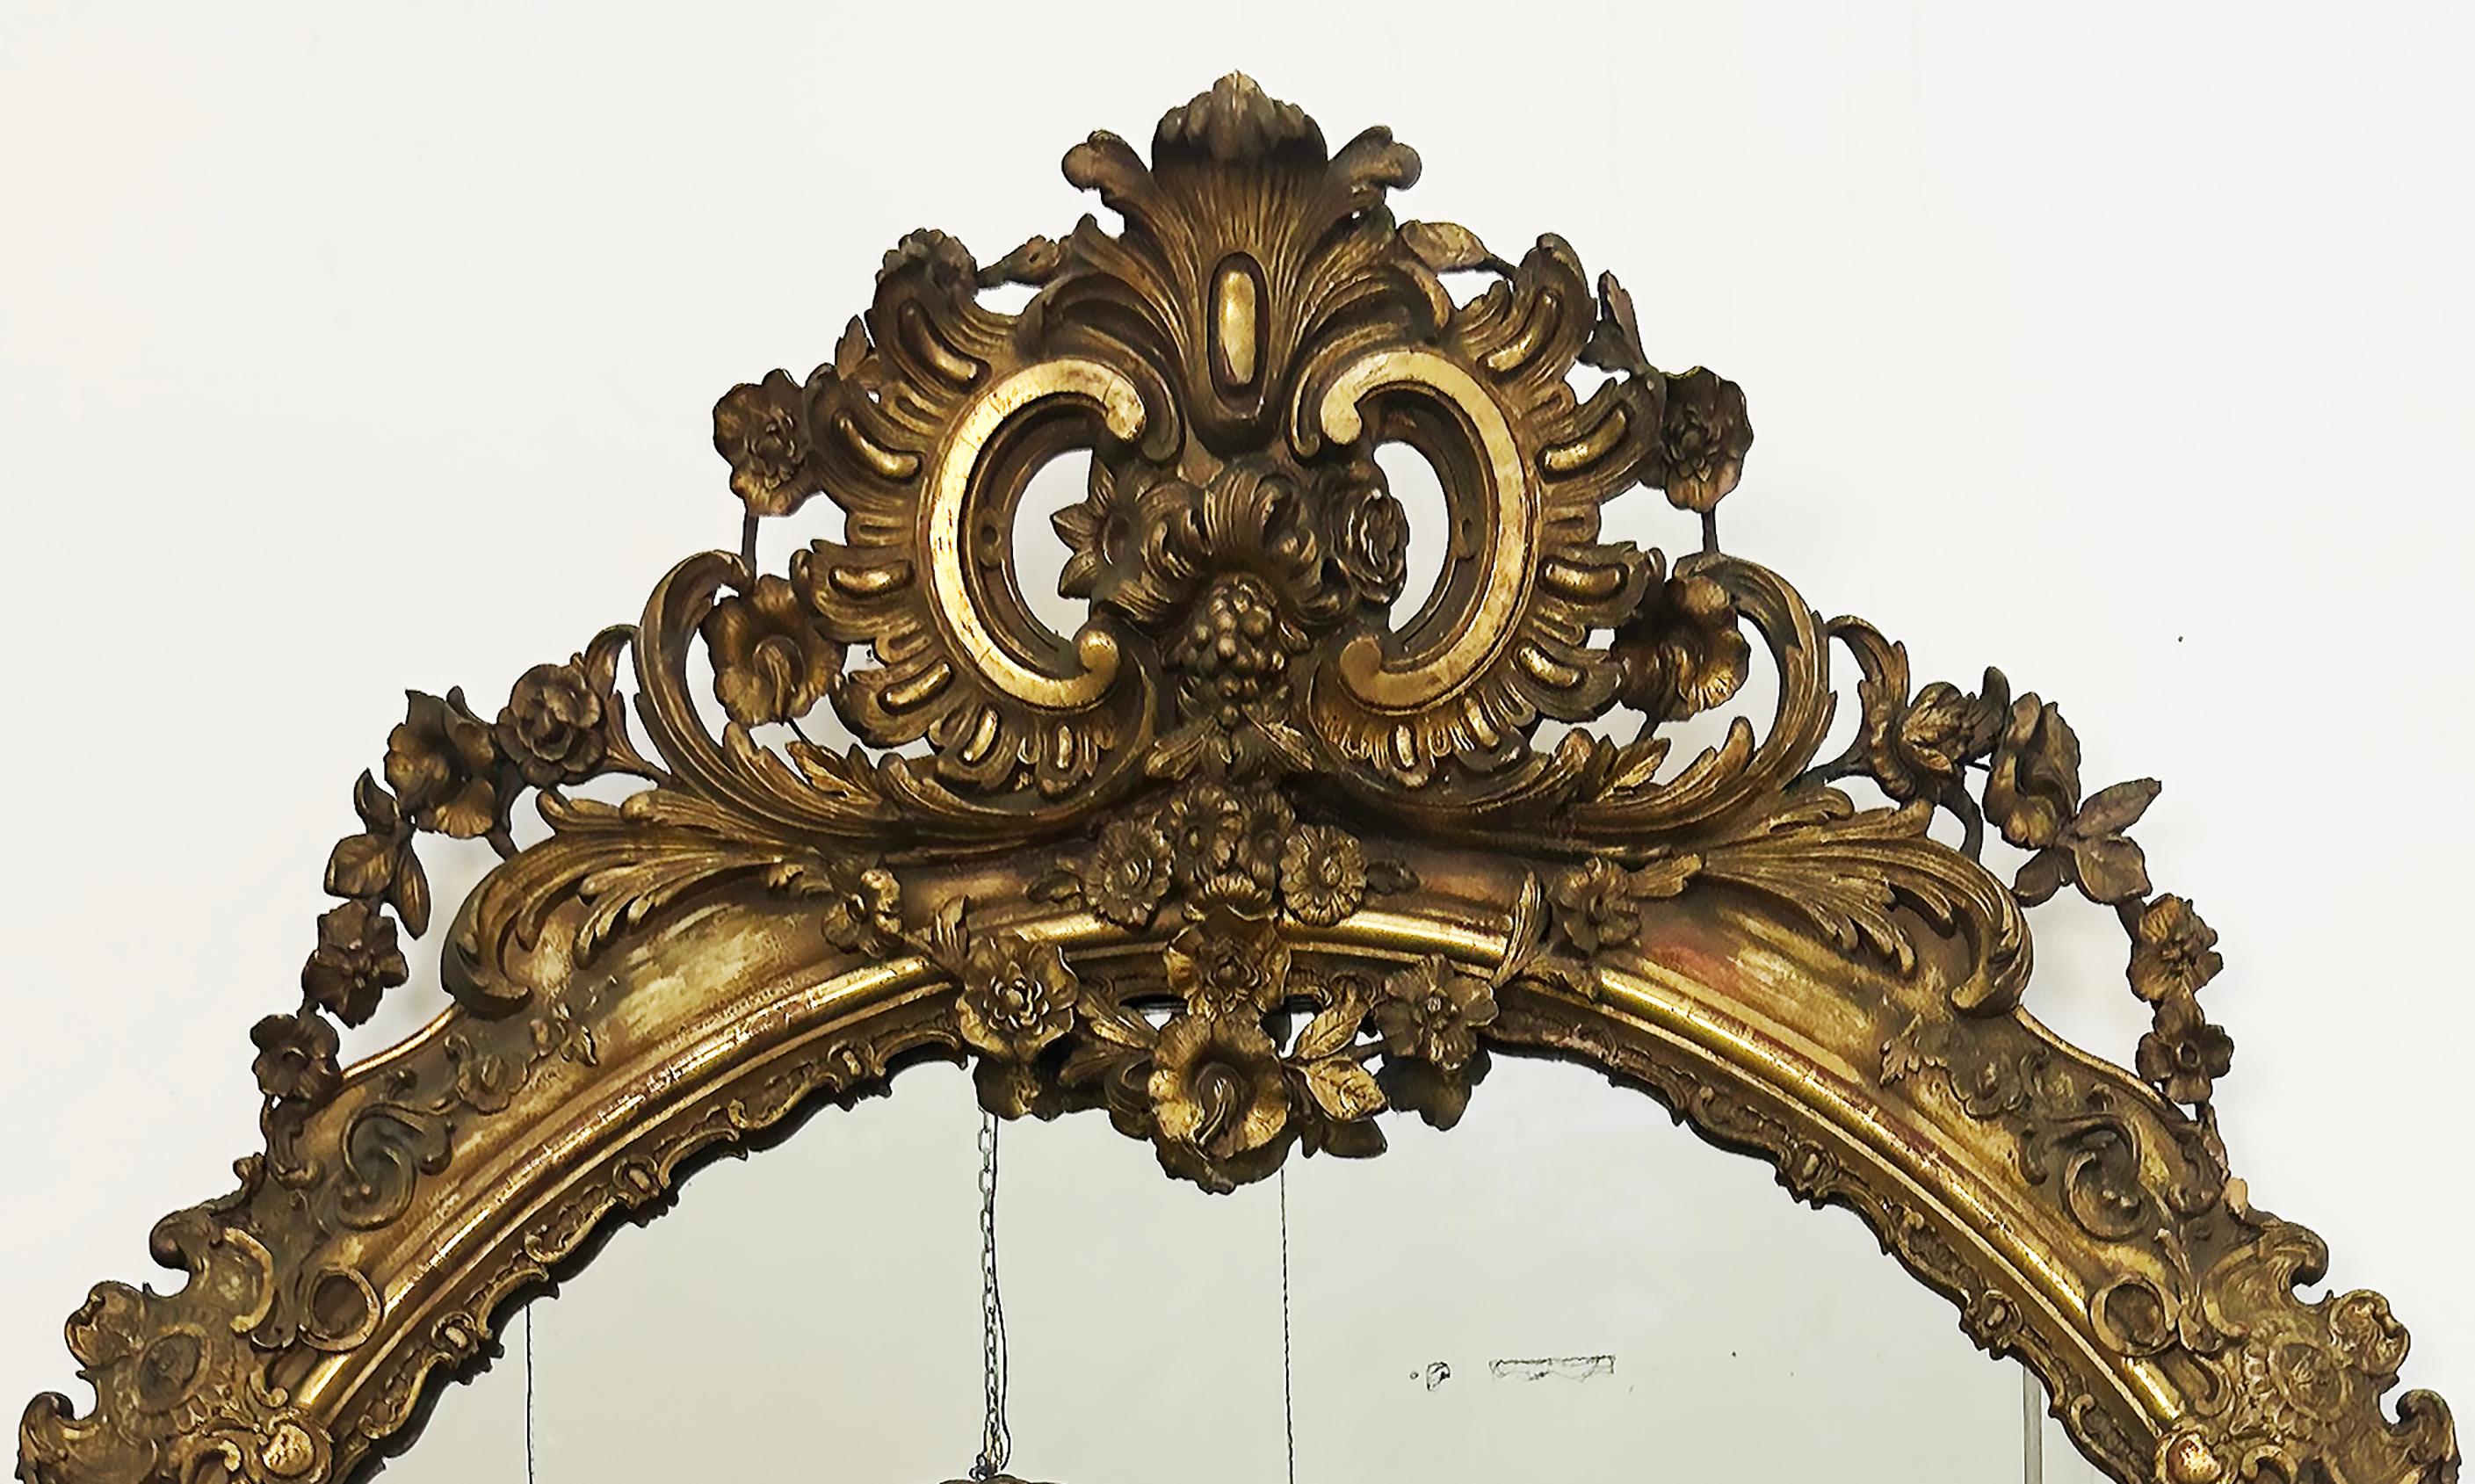 Monumental European Oval Giltwood Mirror, Late 19th-Early 20th Century

Offered for sale is a late 19th or early 20th-century monumental oval gesso and giltwood mirror from Europe. The crown of the mirror is embellished with ornate and detailed